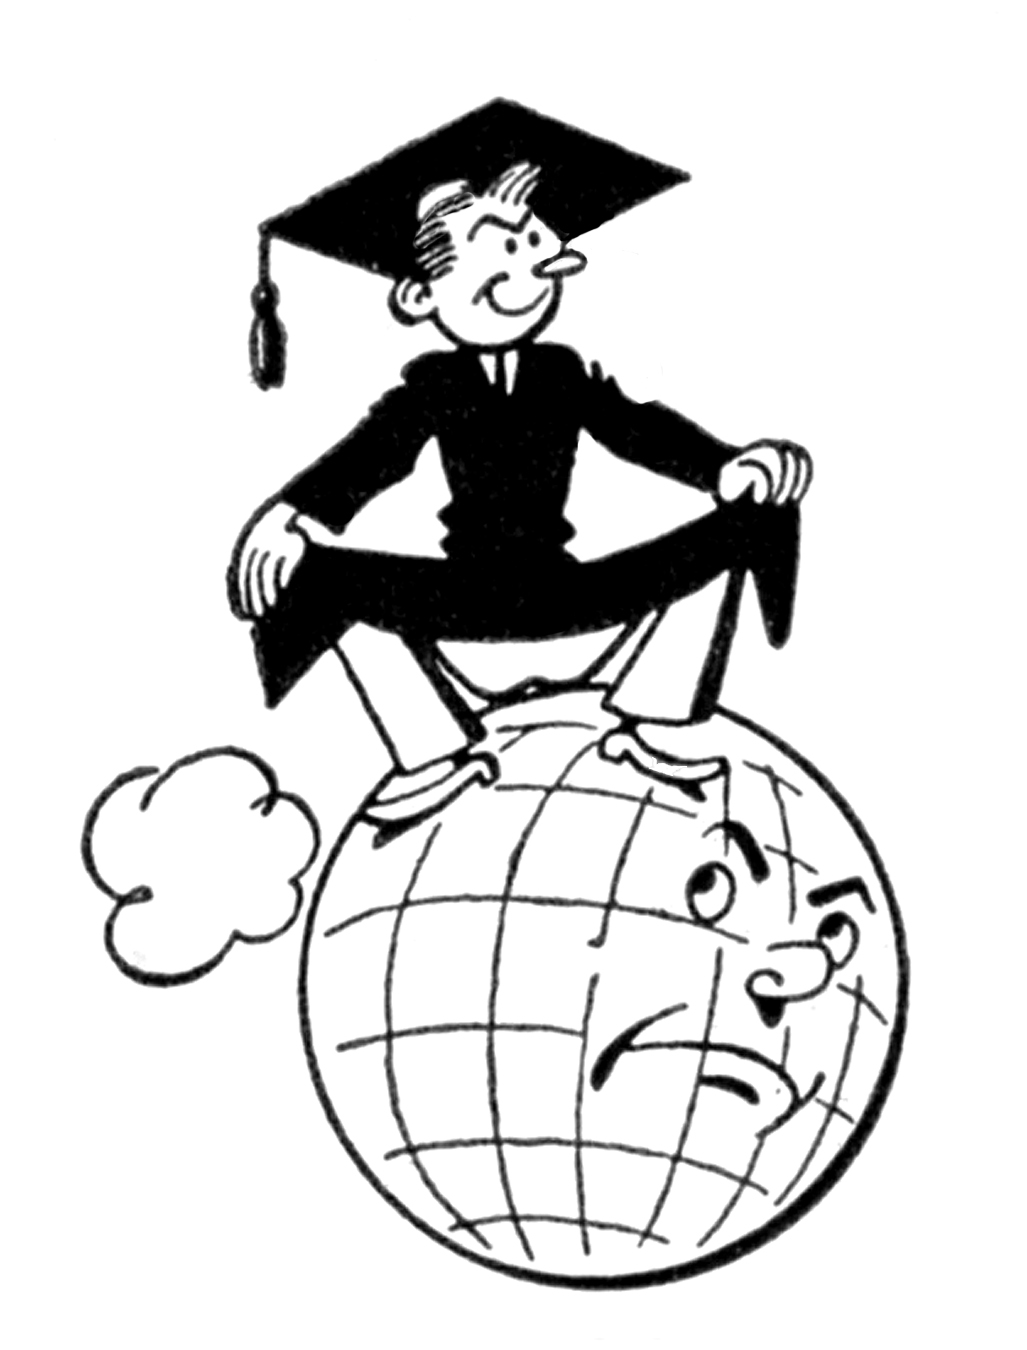 Images For > Graduation Cap And Gown Clipart 2014